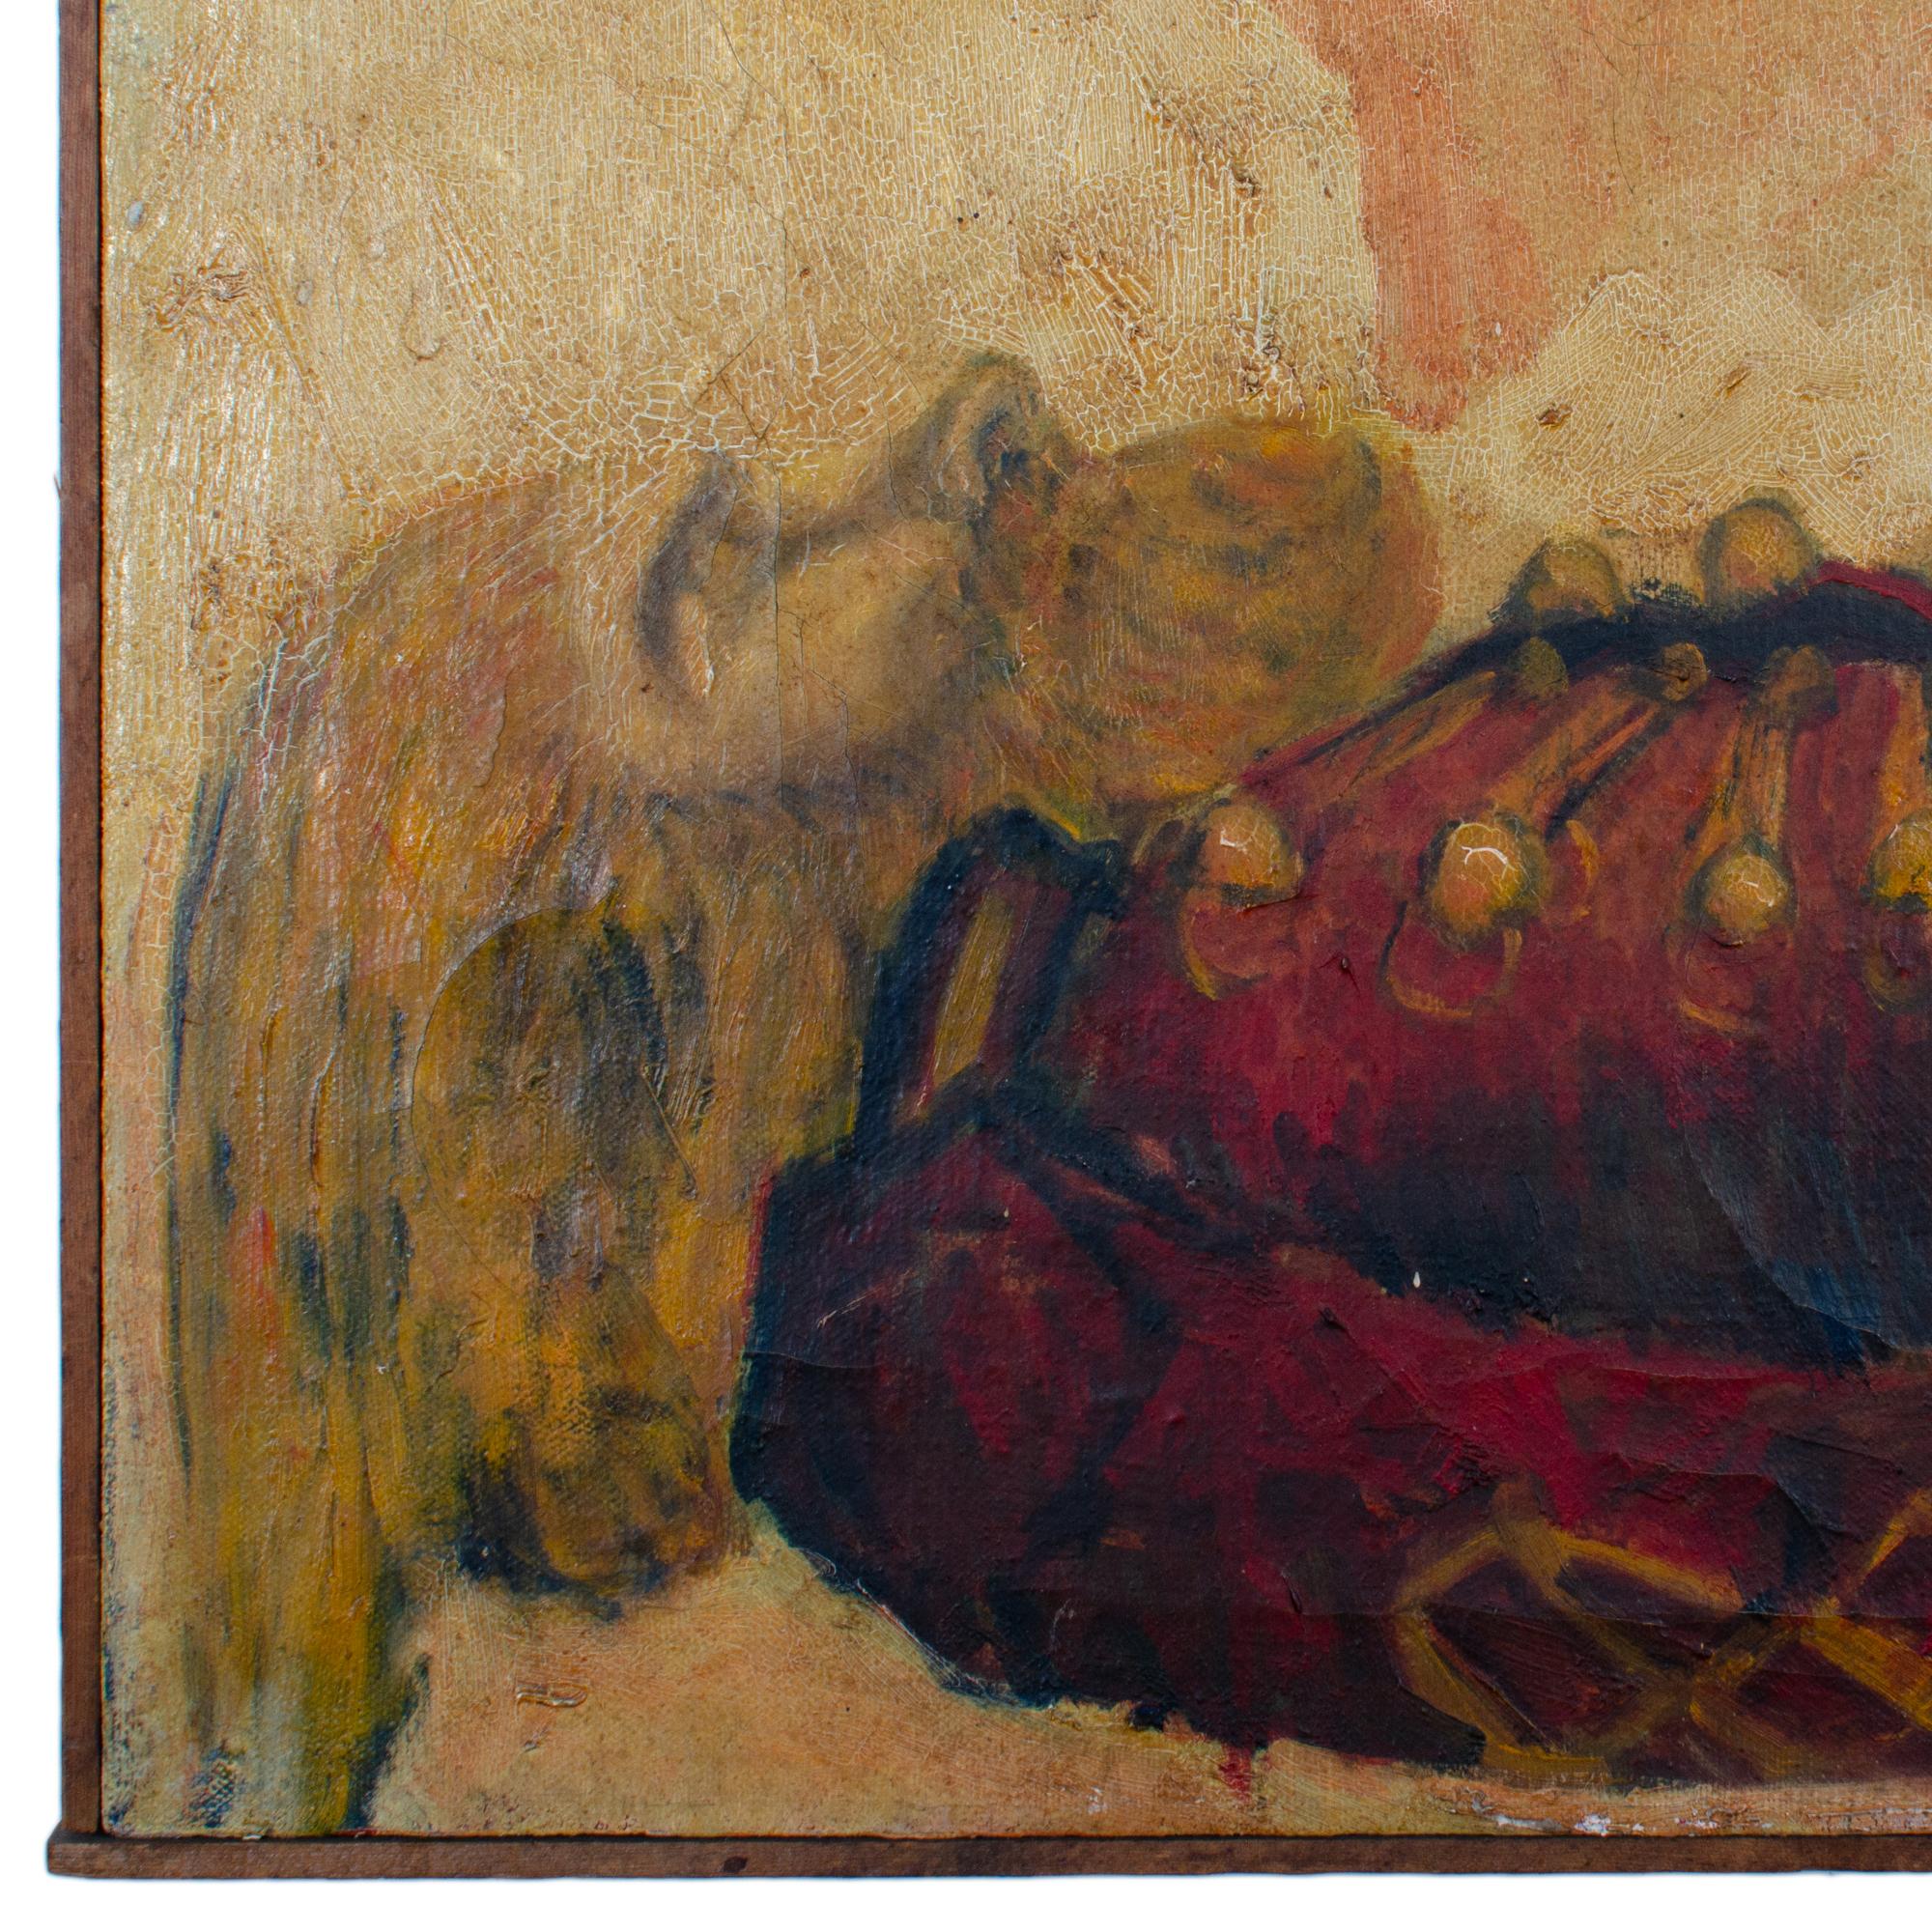 An antique painting of a wounded soldier.

This unsigned piece shows a varnish layer with discoloration and craquelure that lends itself to the curious atmosphere of the image.  

24 ½ inches wide by 1 inch deep by 18 ¾ inches tall